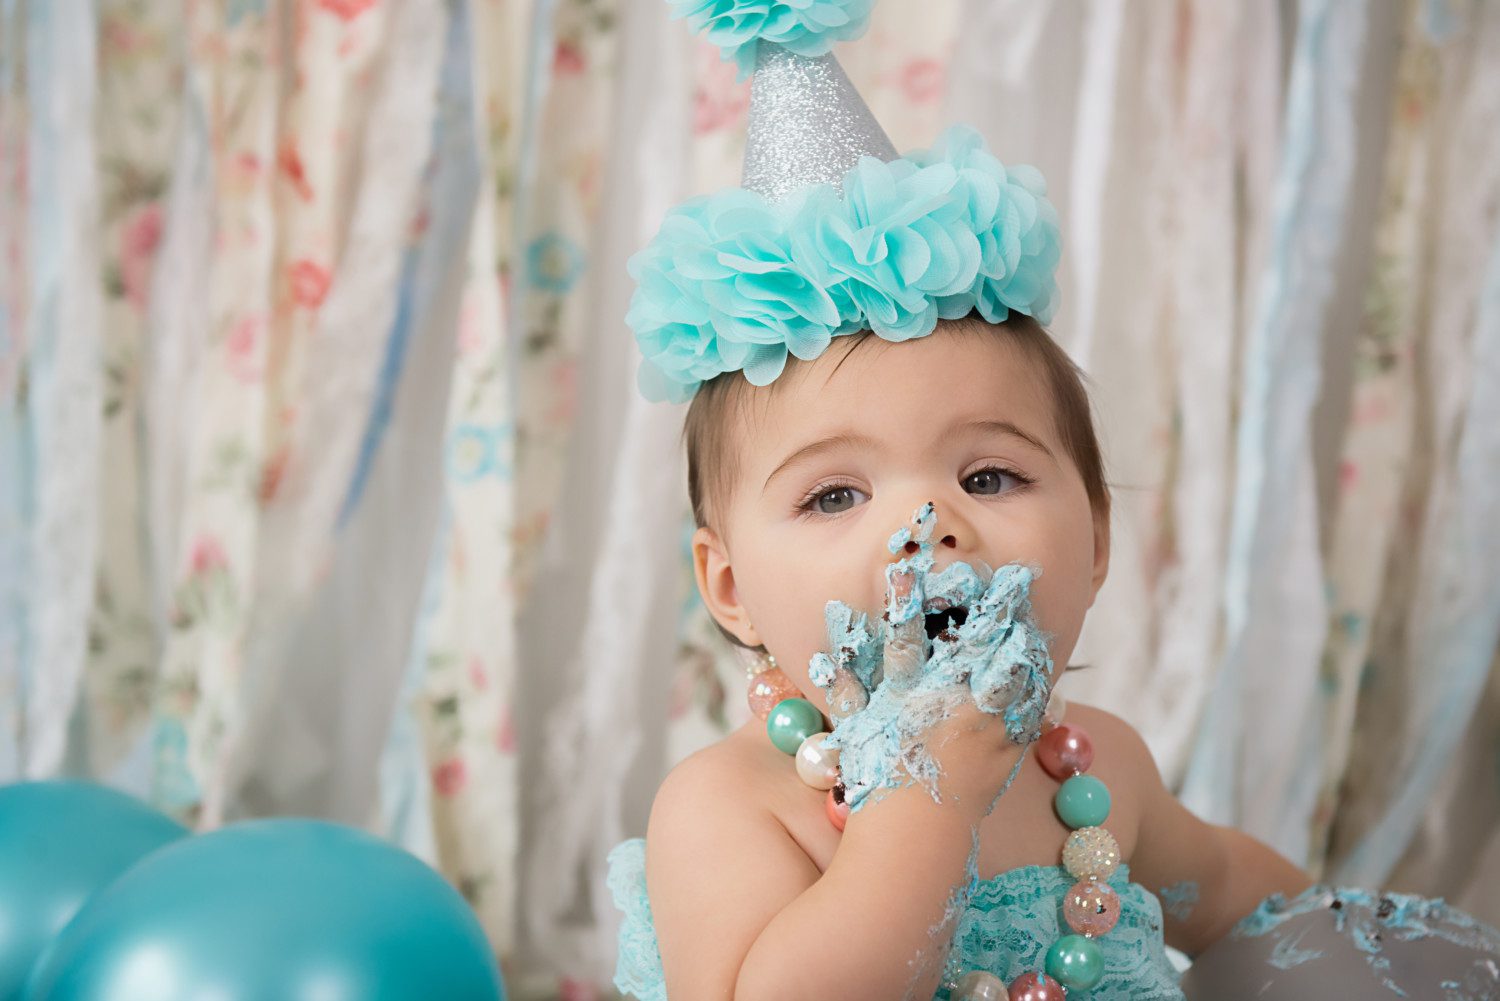 Ellery's First Birthday Session, jenn carroll photography, jenn carroll, session, first birthday photography, smash cake session, family photography, first birthday, smash cake session, baby girl, tampa baby photography, tampa, zephyrhills, wesley chapel photographer, florida photographer